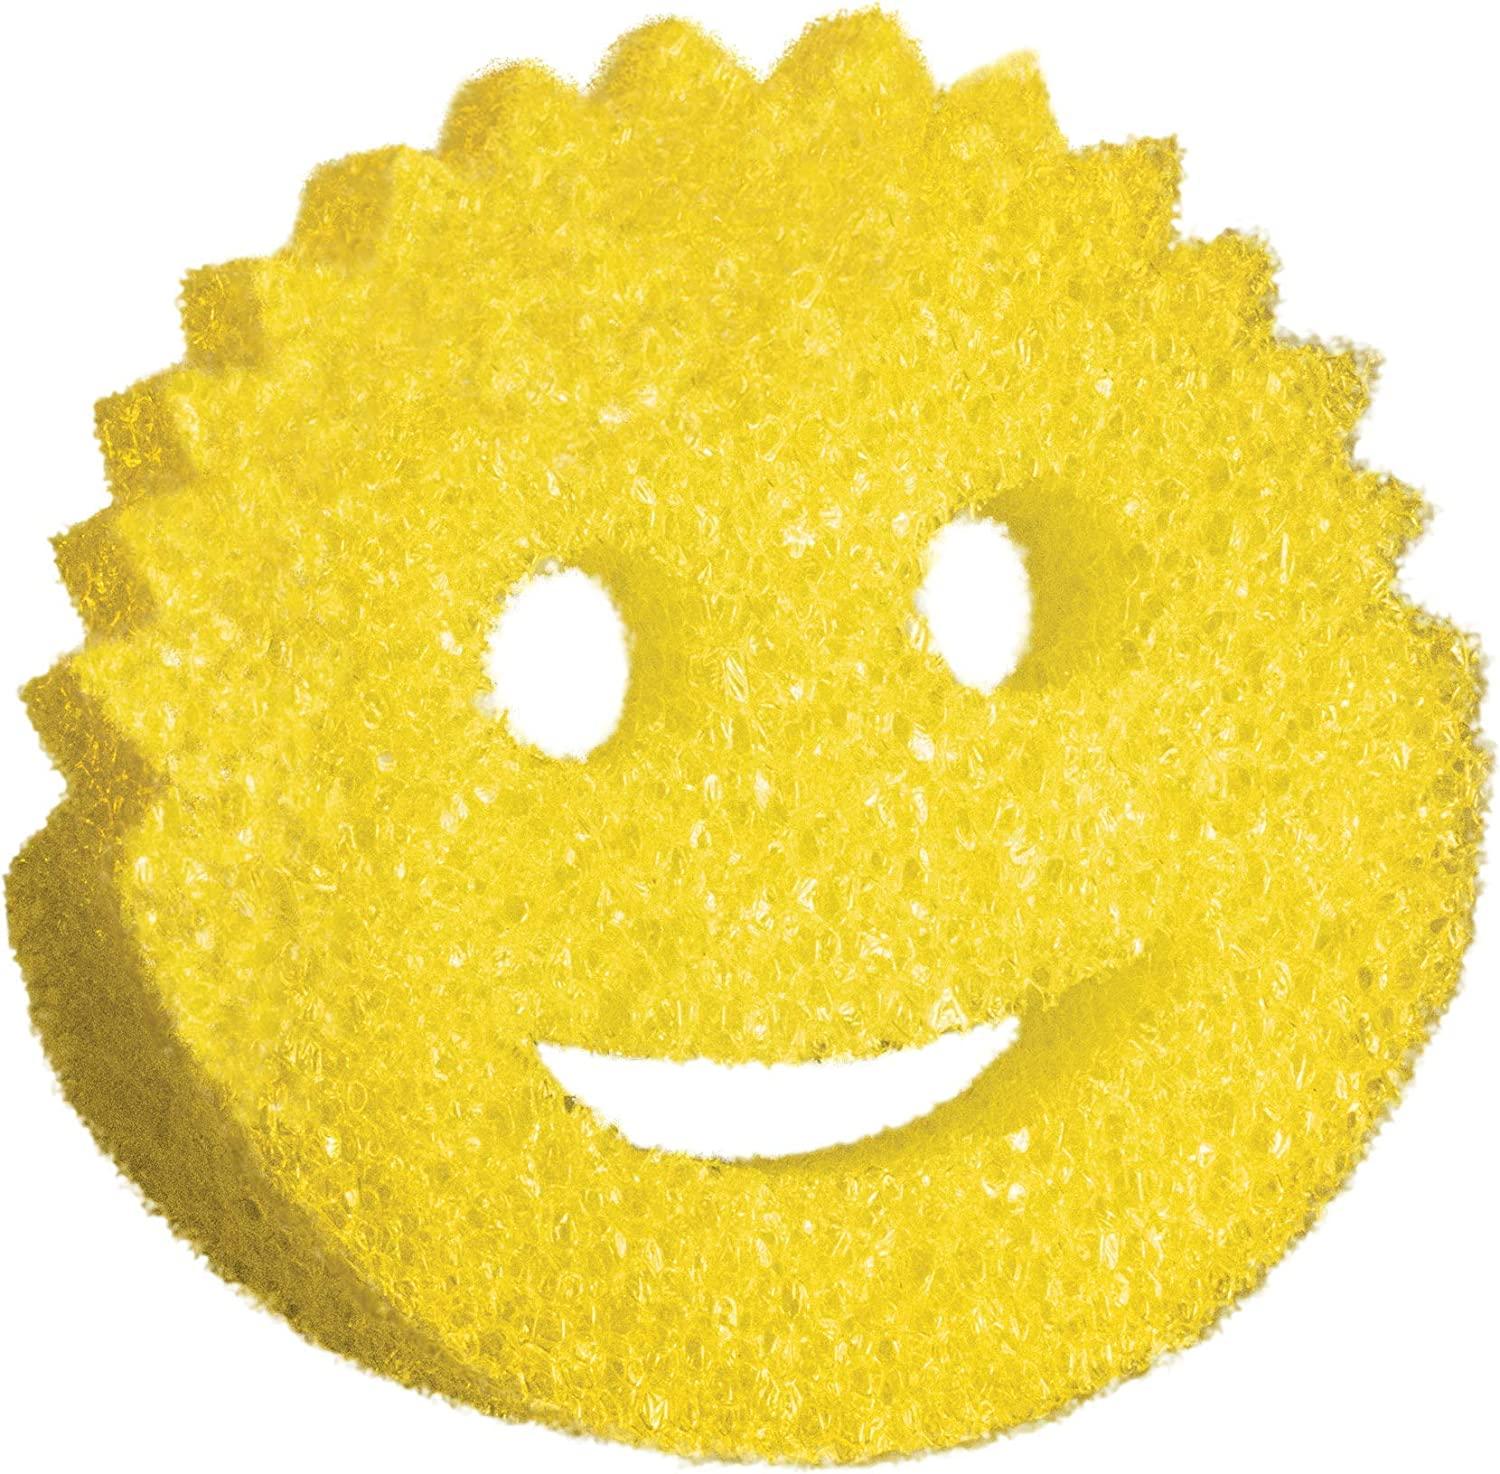 Scrub Daddy FlexTexture Scrubber - Crab, 1 ct - Fry's Food Stores